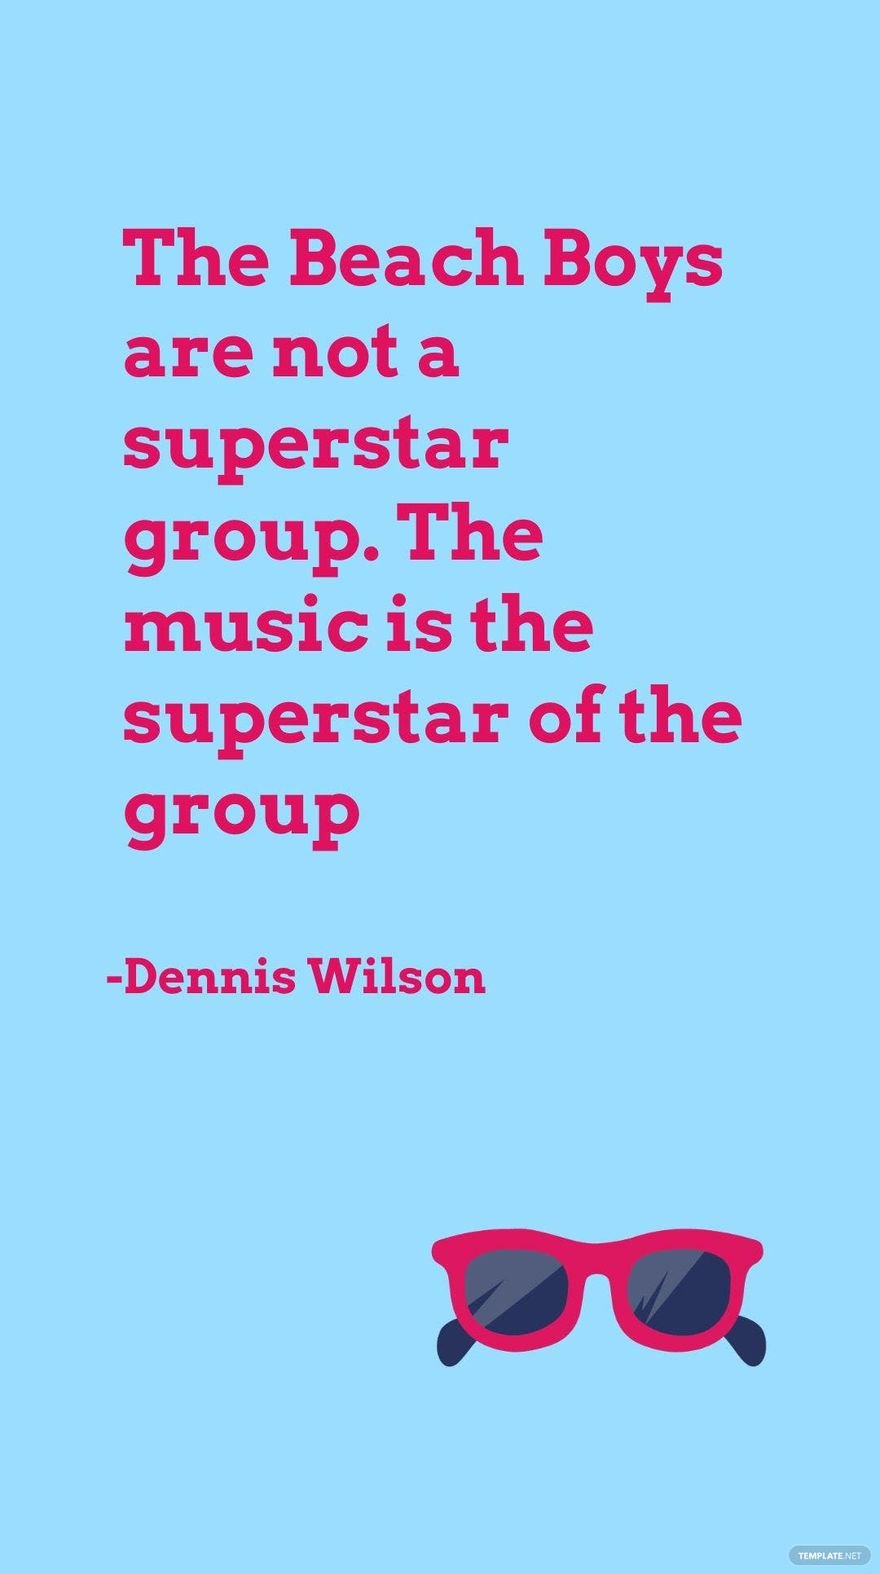 Free Dennis Wilson - The Beach Boys are not a superstar group. The music is the superstar of the group in JPG